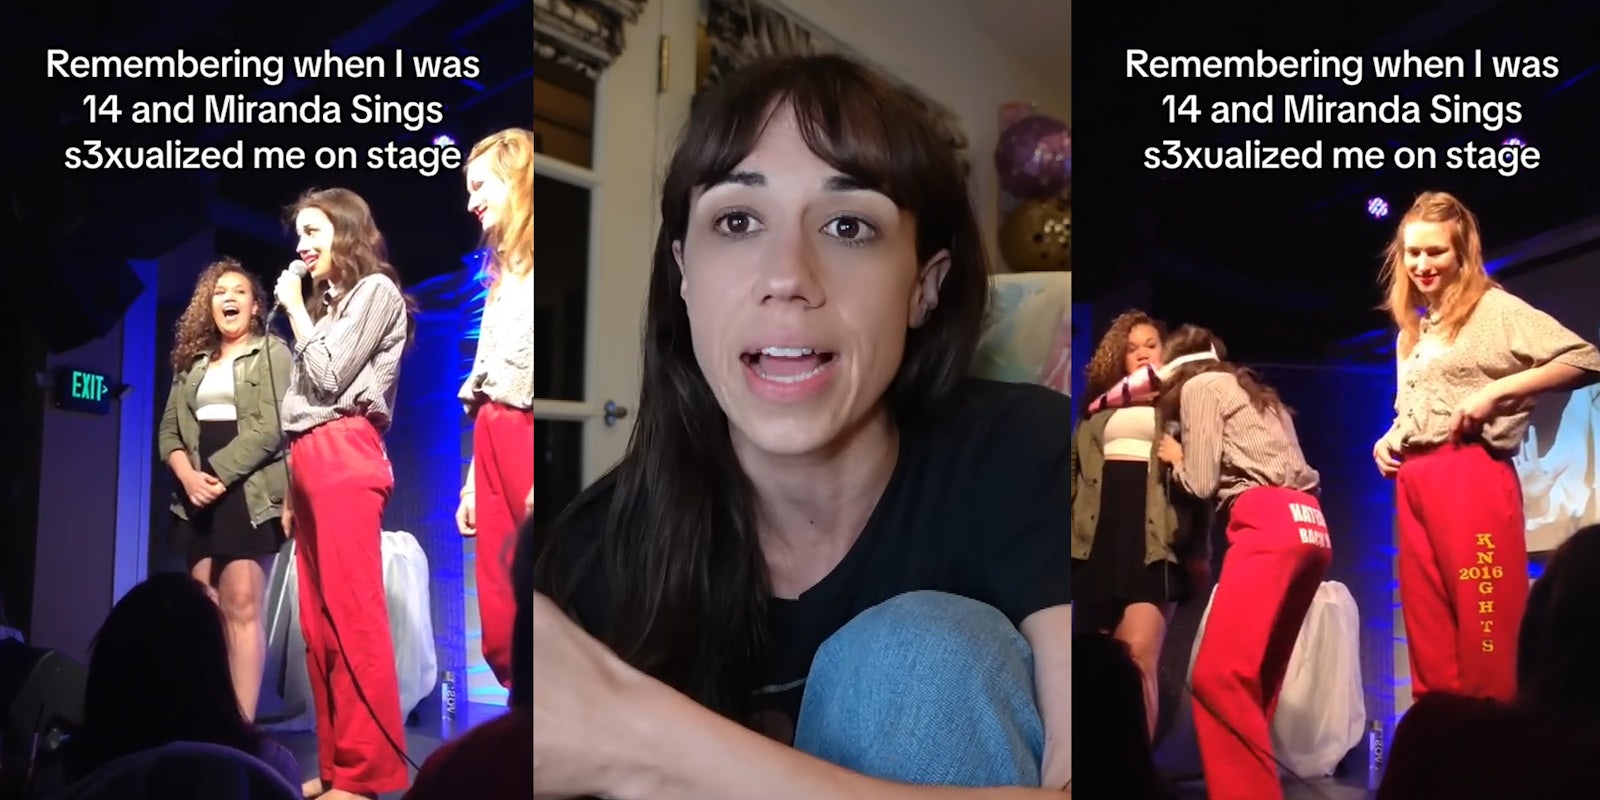 Colleen Ballinger Miranda Sings on stage with fans with caption 'Remembering when I was 14 and Miranda Sings s3xualized me on stage' (l) Colleen Ballinger speaking (c) Colleen Ballinger Miranda Sings on stage with fans with caption 'Remembering when I was 14 and Miranda Sings s3xualized me on stage' (r)